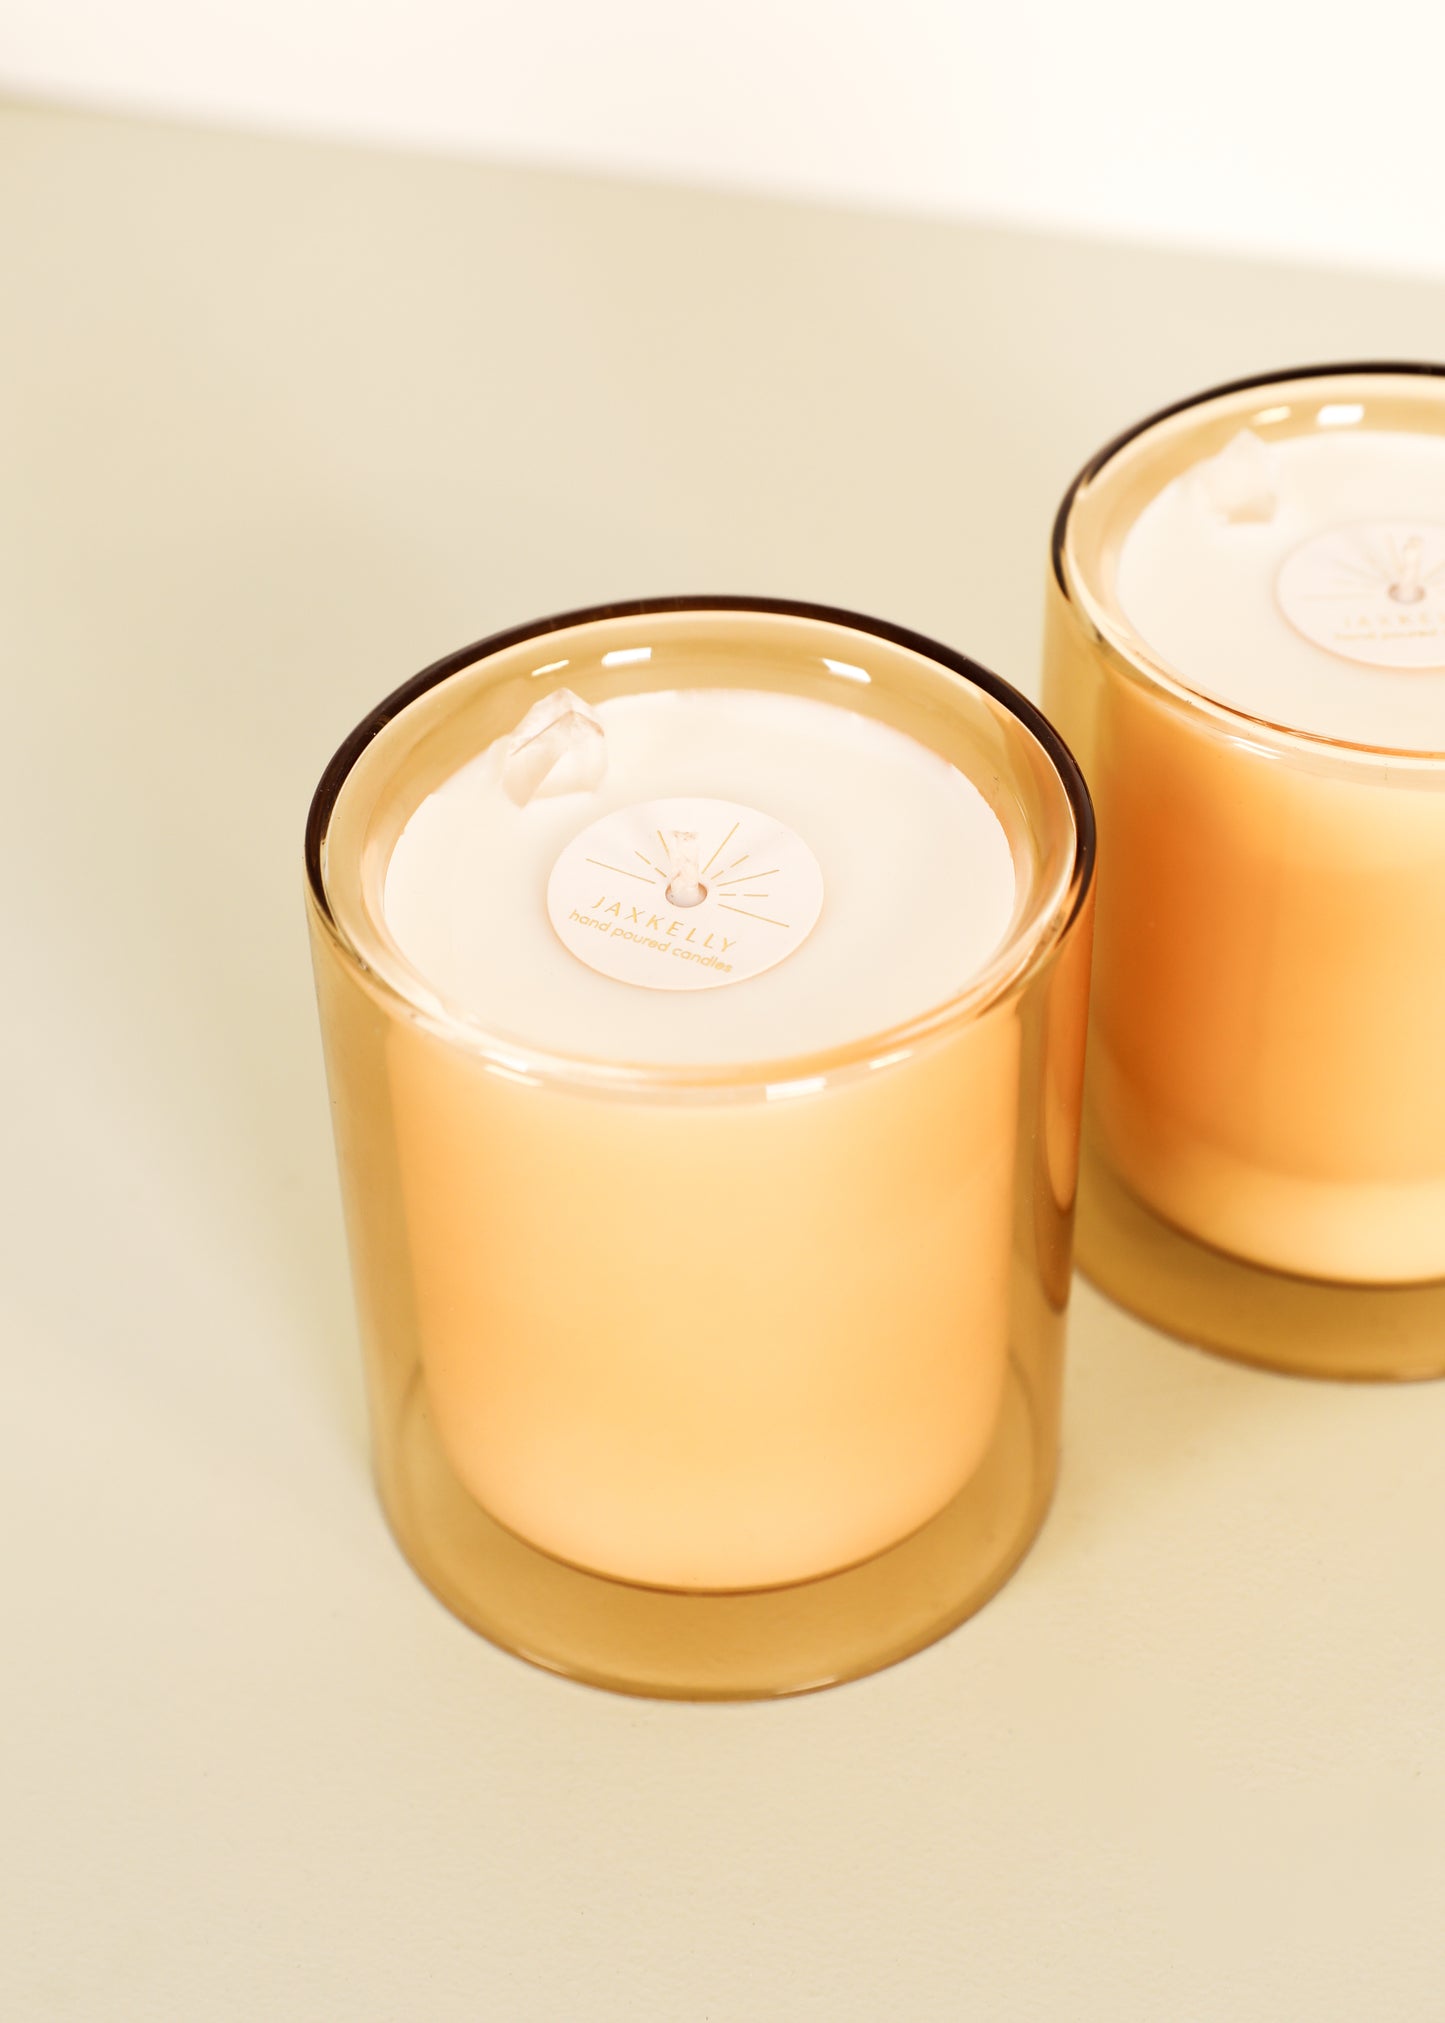 Naples Suspended Candle - Ambiance Collection